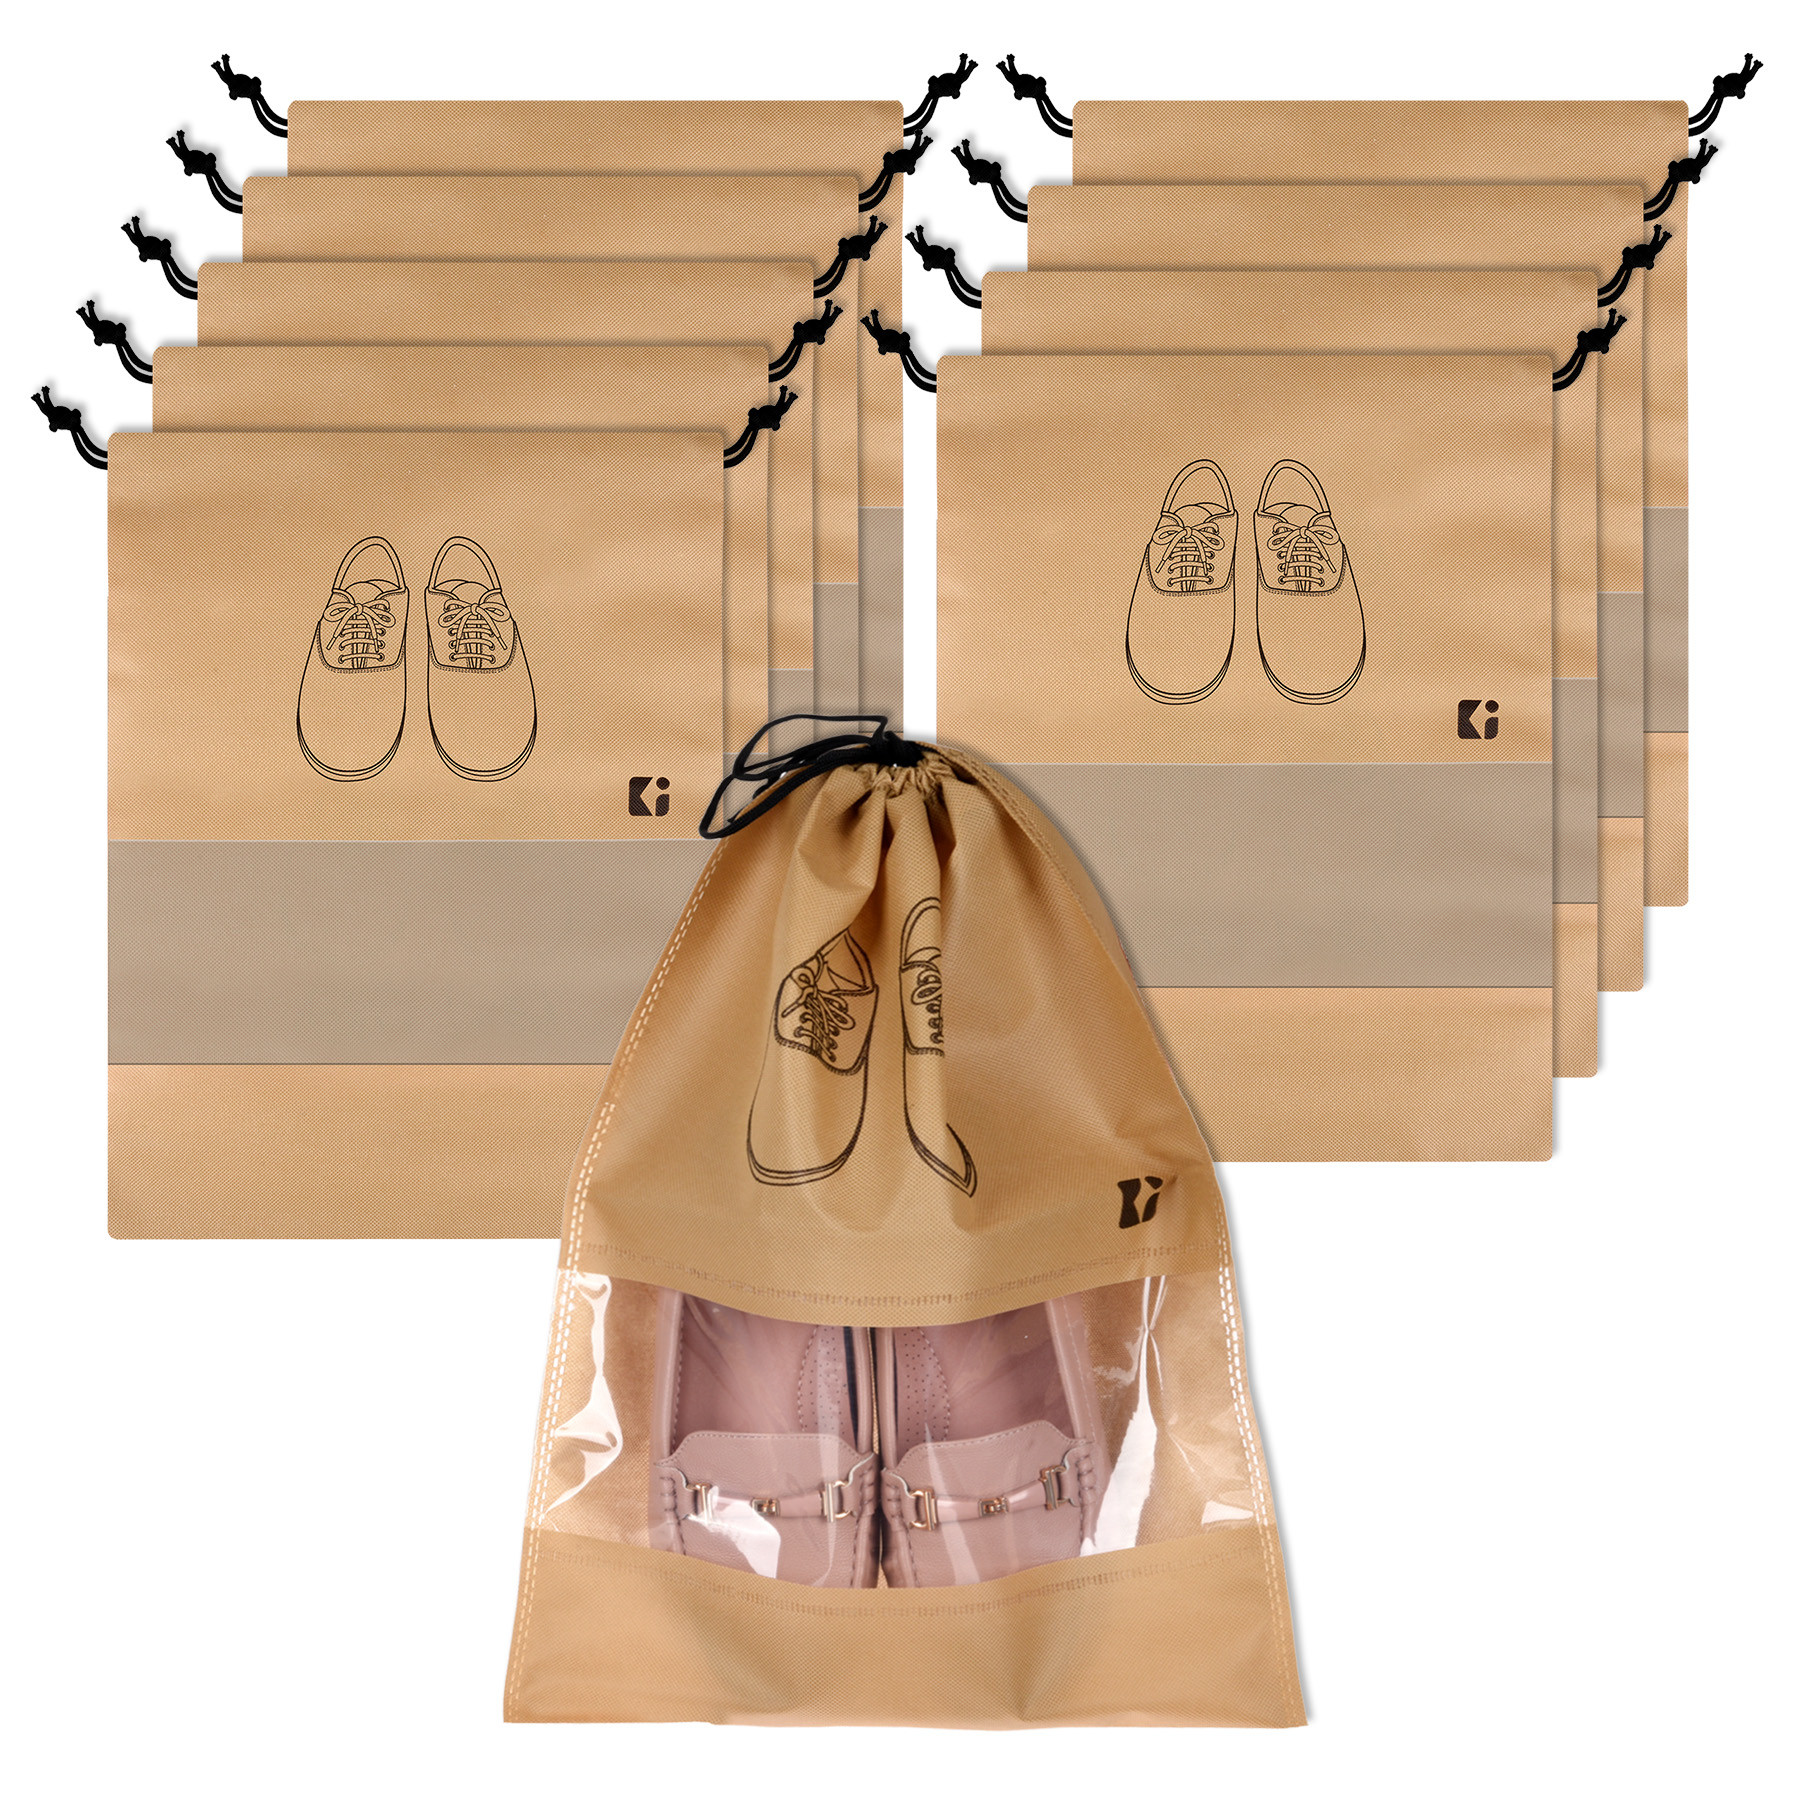 Kuber Industries Shoe Bags | Shoe Bags for Travel | Non-Woven Shoe Storage Bags | Storage Organizers Set | Shoe Cover with Transparent Window | Shoe Dori Cover | Beige